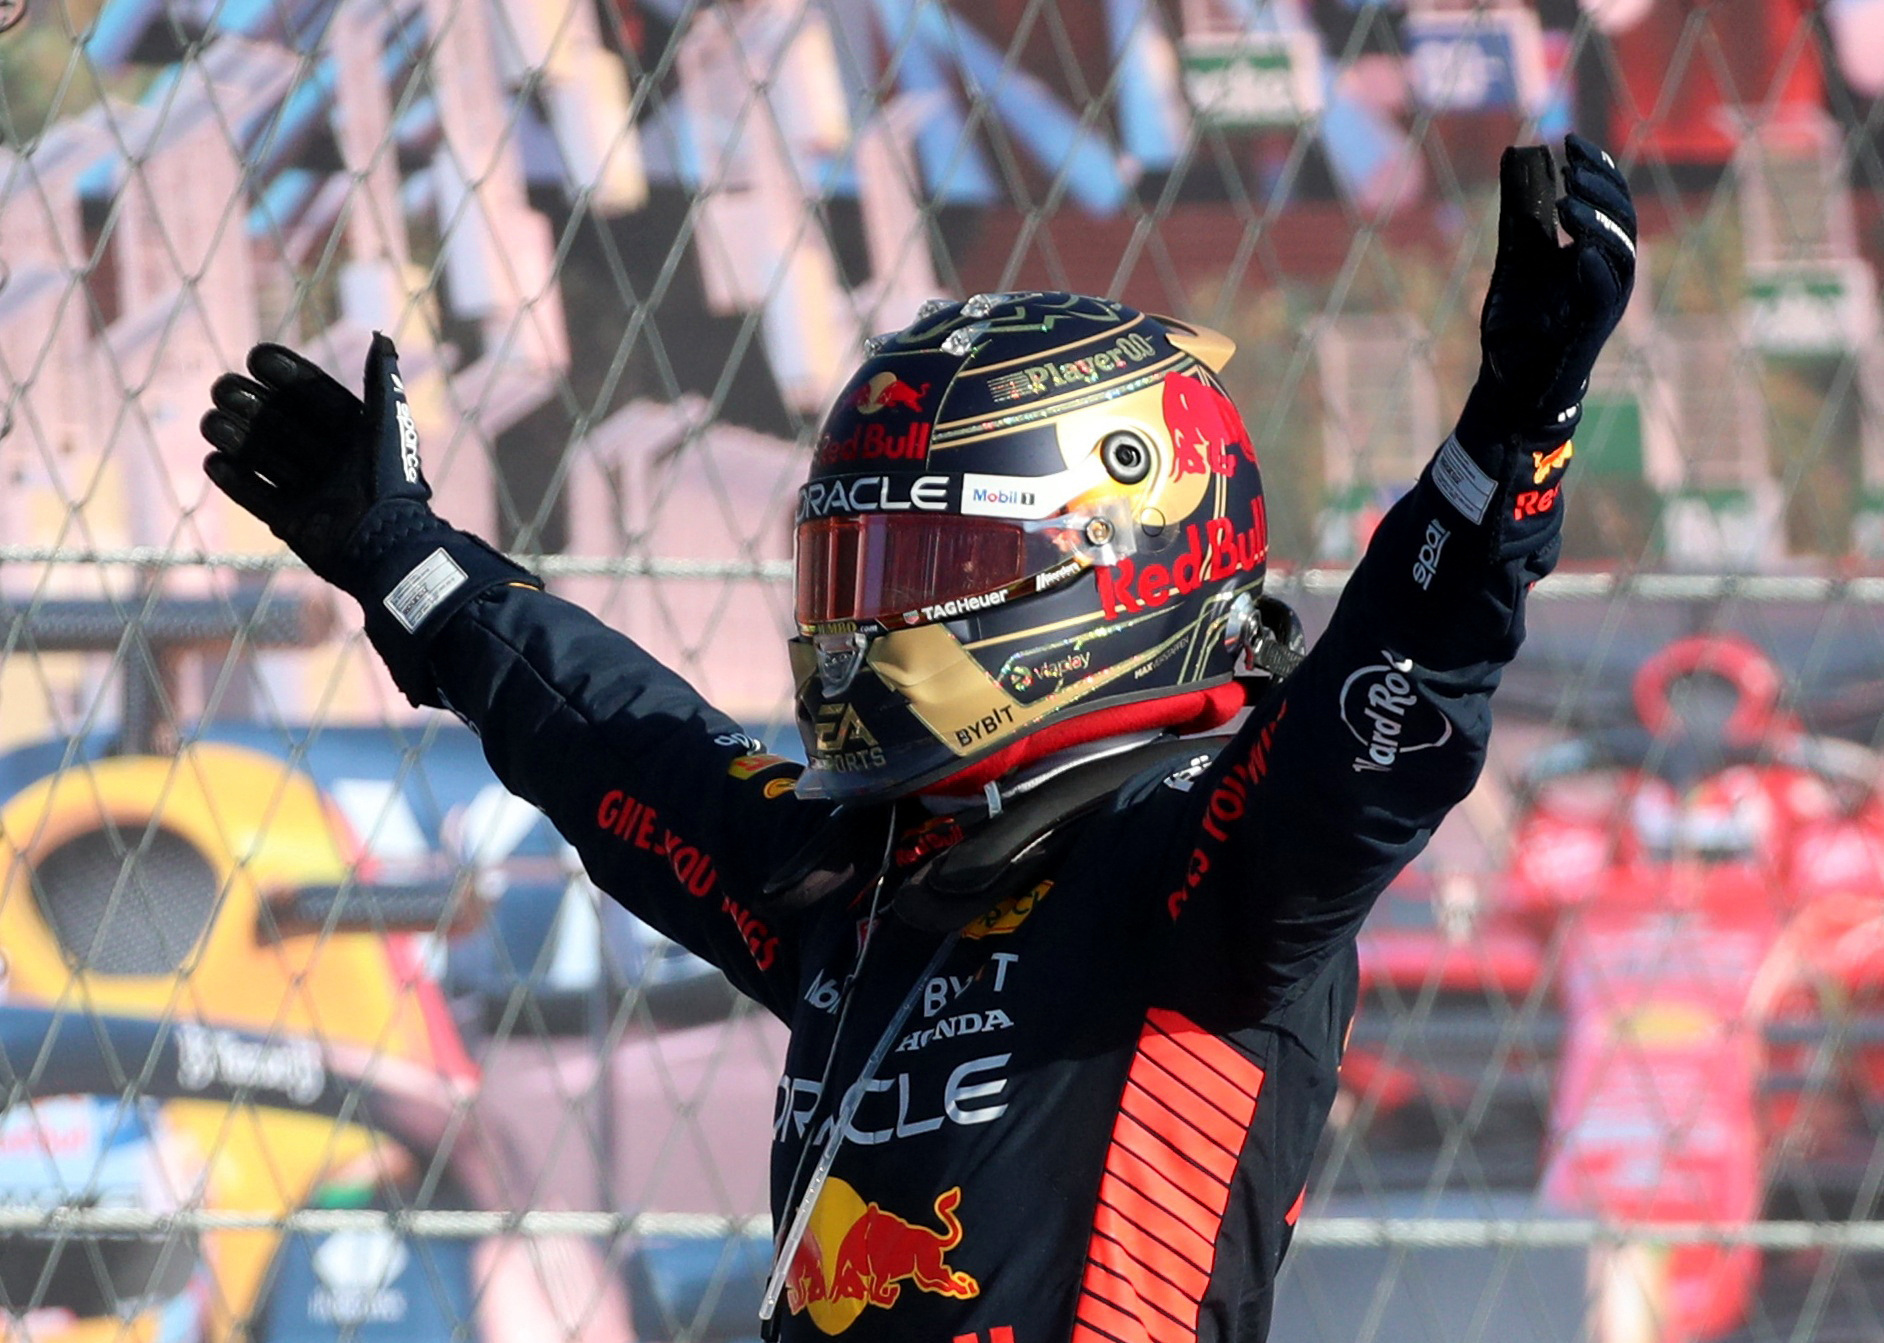 F1 - Verstappen sets new record with 16th win of season in Mexico ahead of  Hamilton and Leclerc